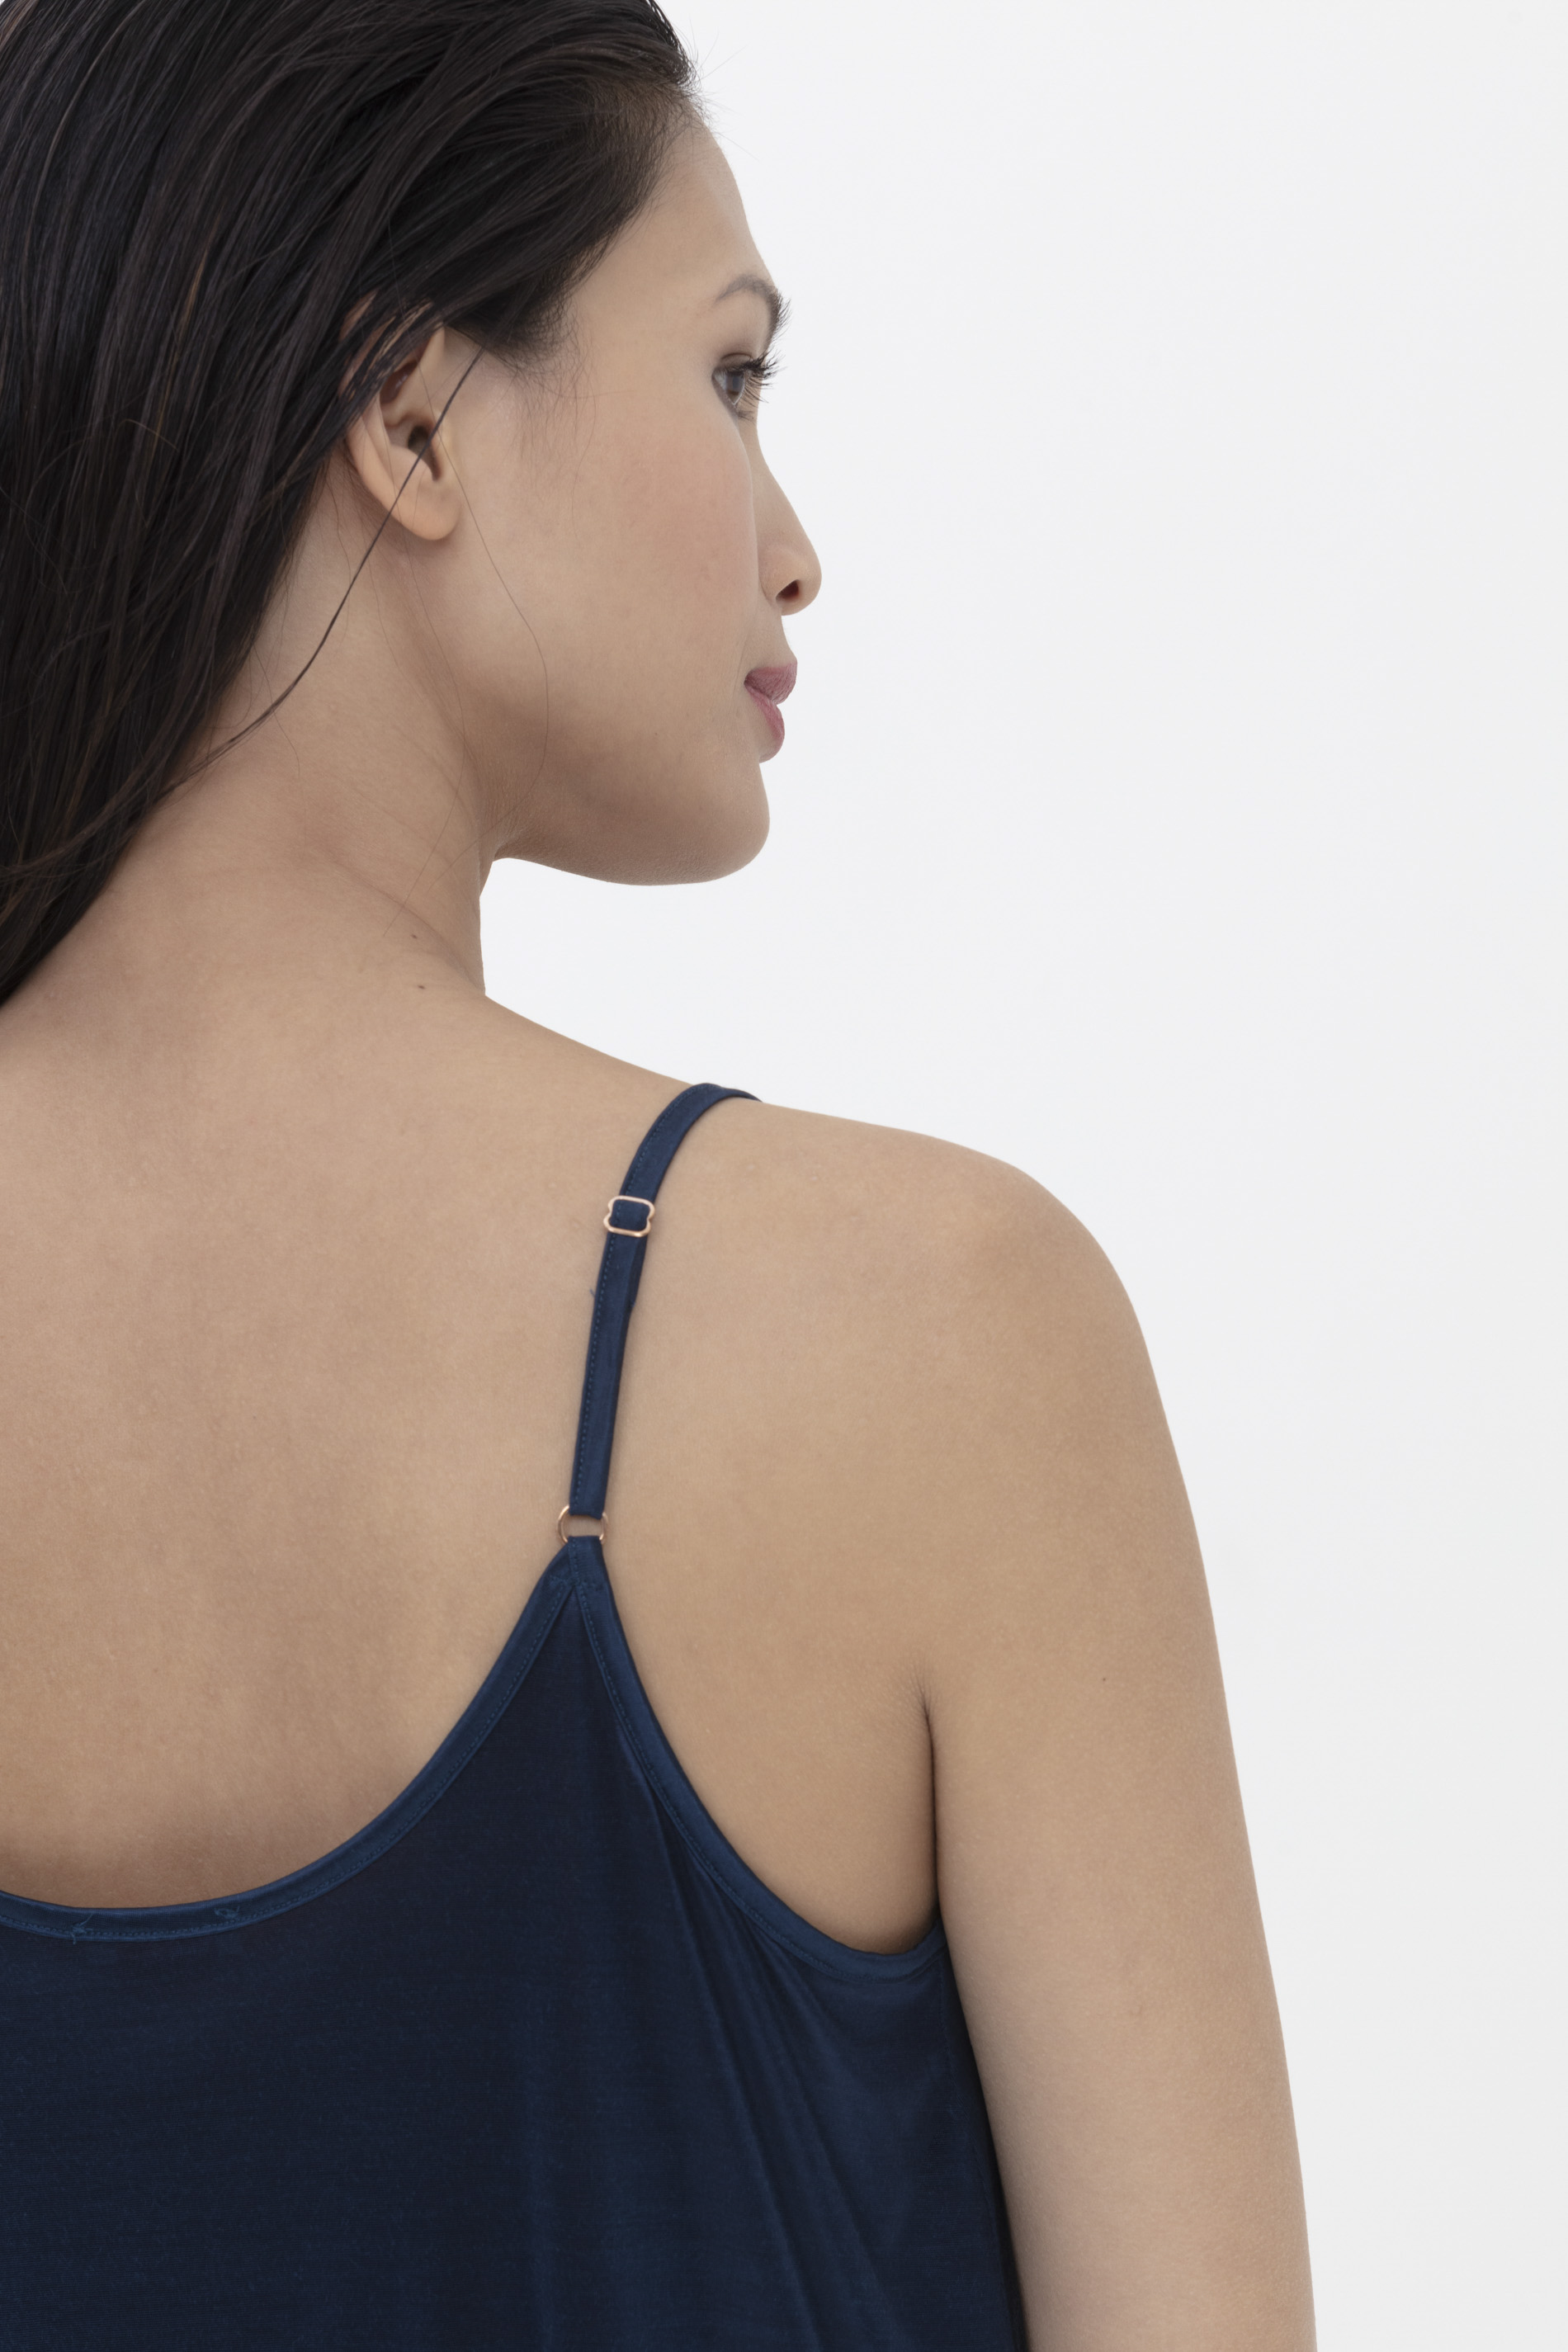 Camisole Ink Blue Serie Coco Detail View 02 | mey®